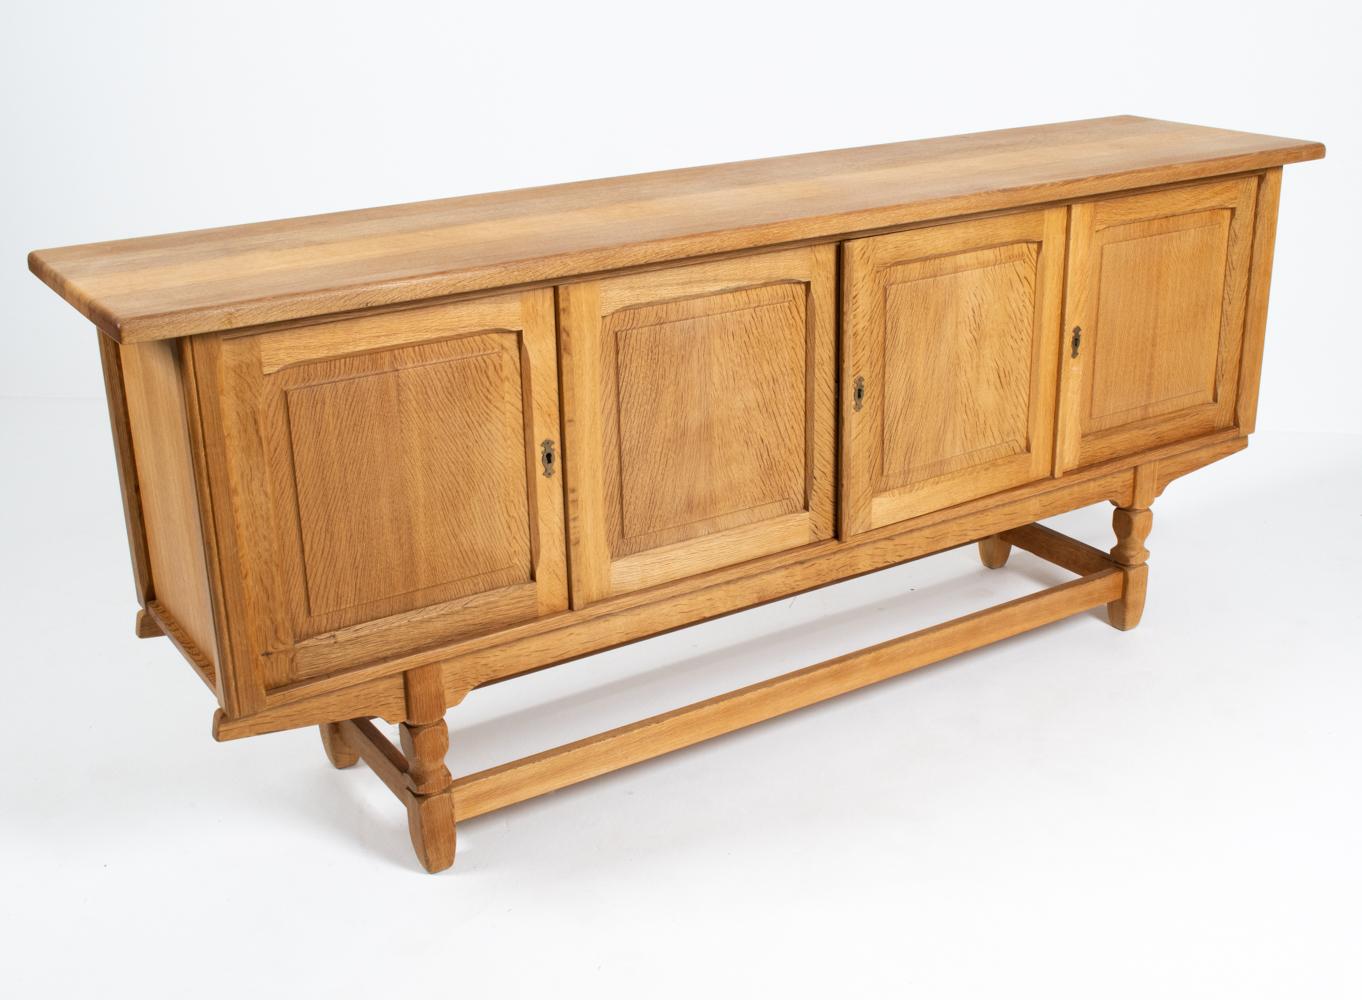 The natural beauty of quarter-sawn white oak takes center stage in this exceptional sideboard cabinet. Sturdy and solid, this piece features craftsman details including dovetailed drawers, recessed panel doors with interesting chamfered molding, and